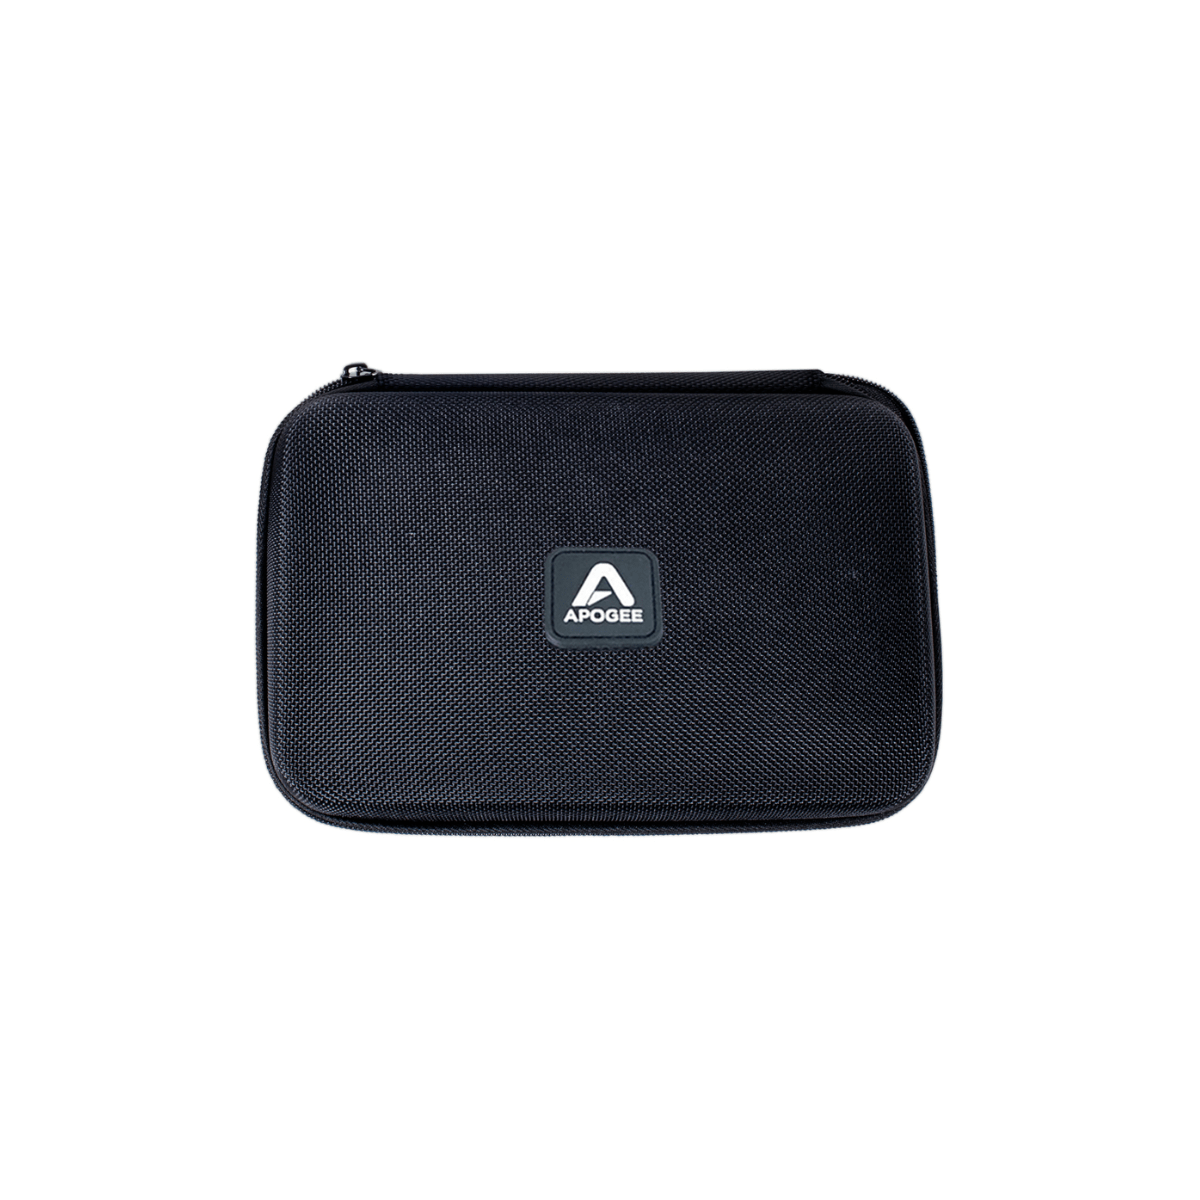 JAM & MIC ACCESSORIES HypeMiC Carrying Case